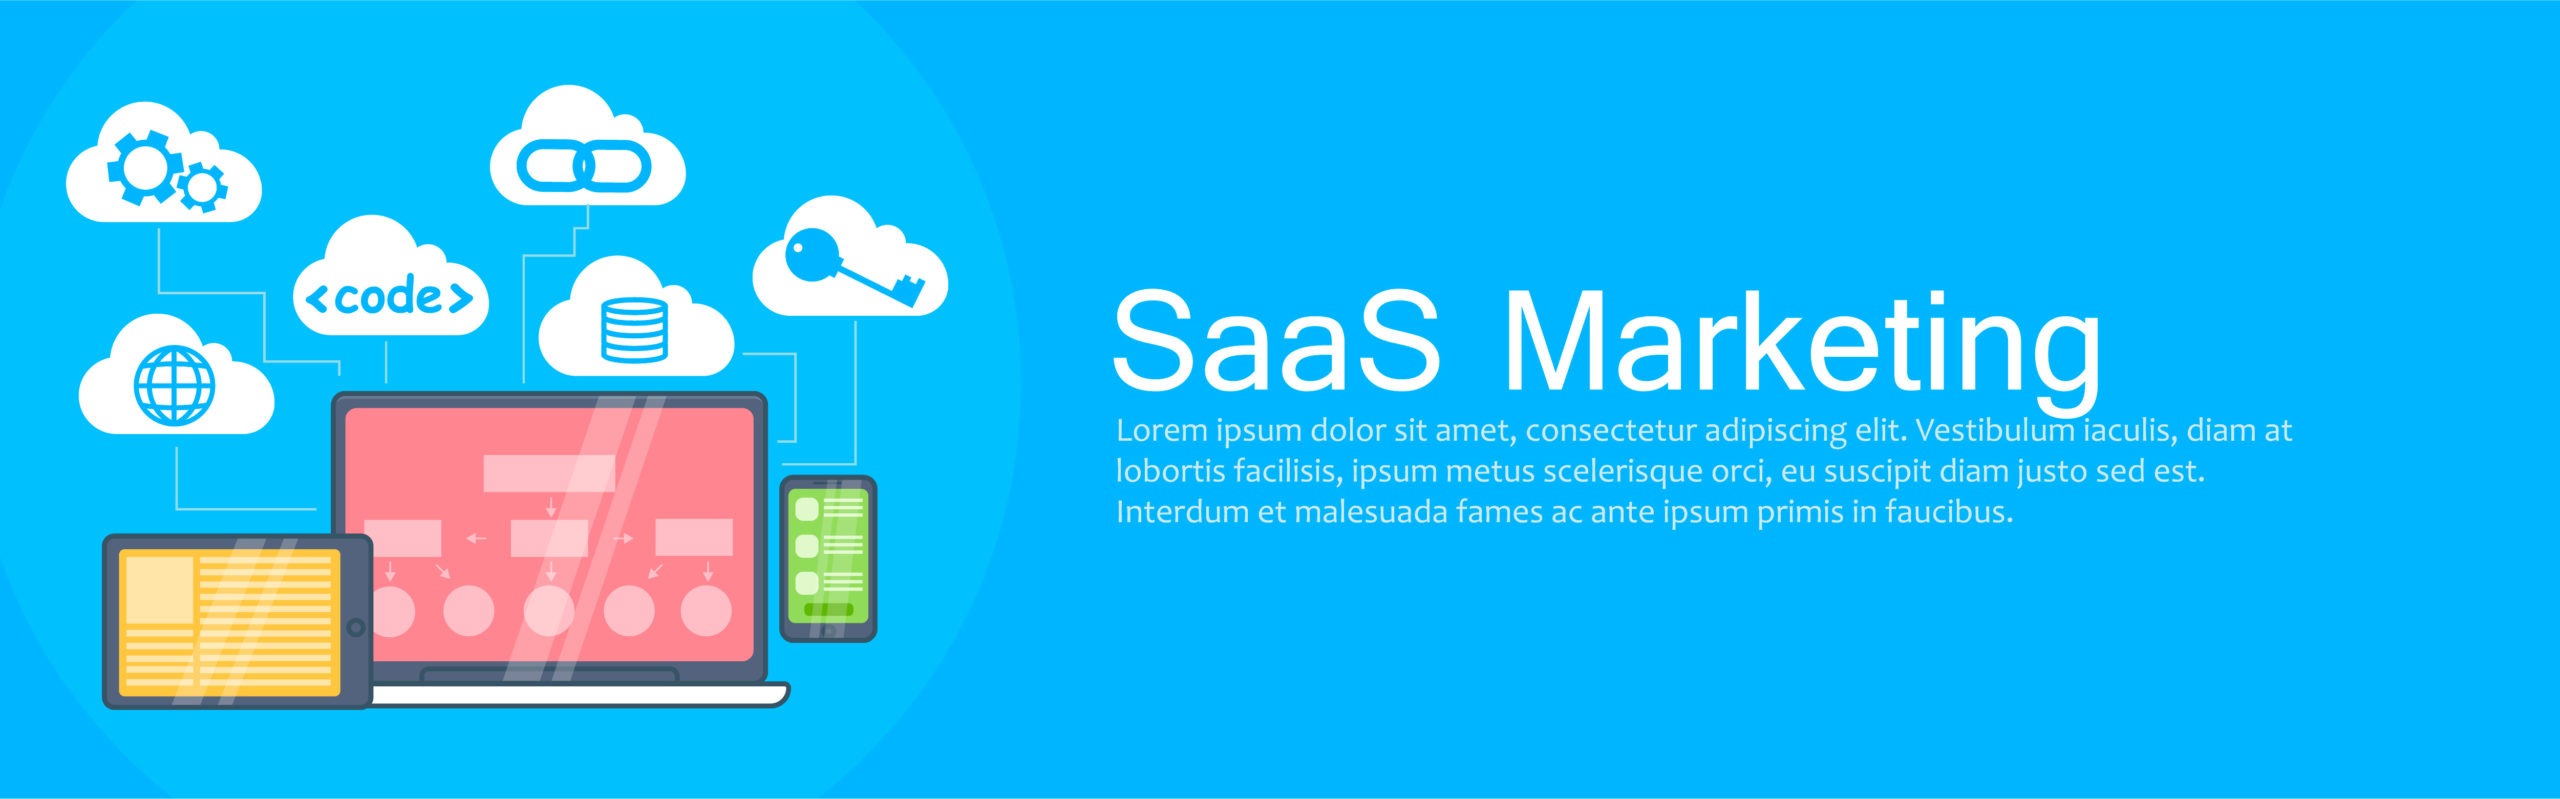 1540385 SaaS Marketing Banner. Laptop, tablet and phone, cloud s